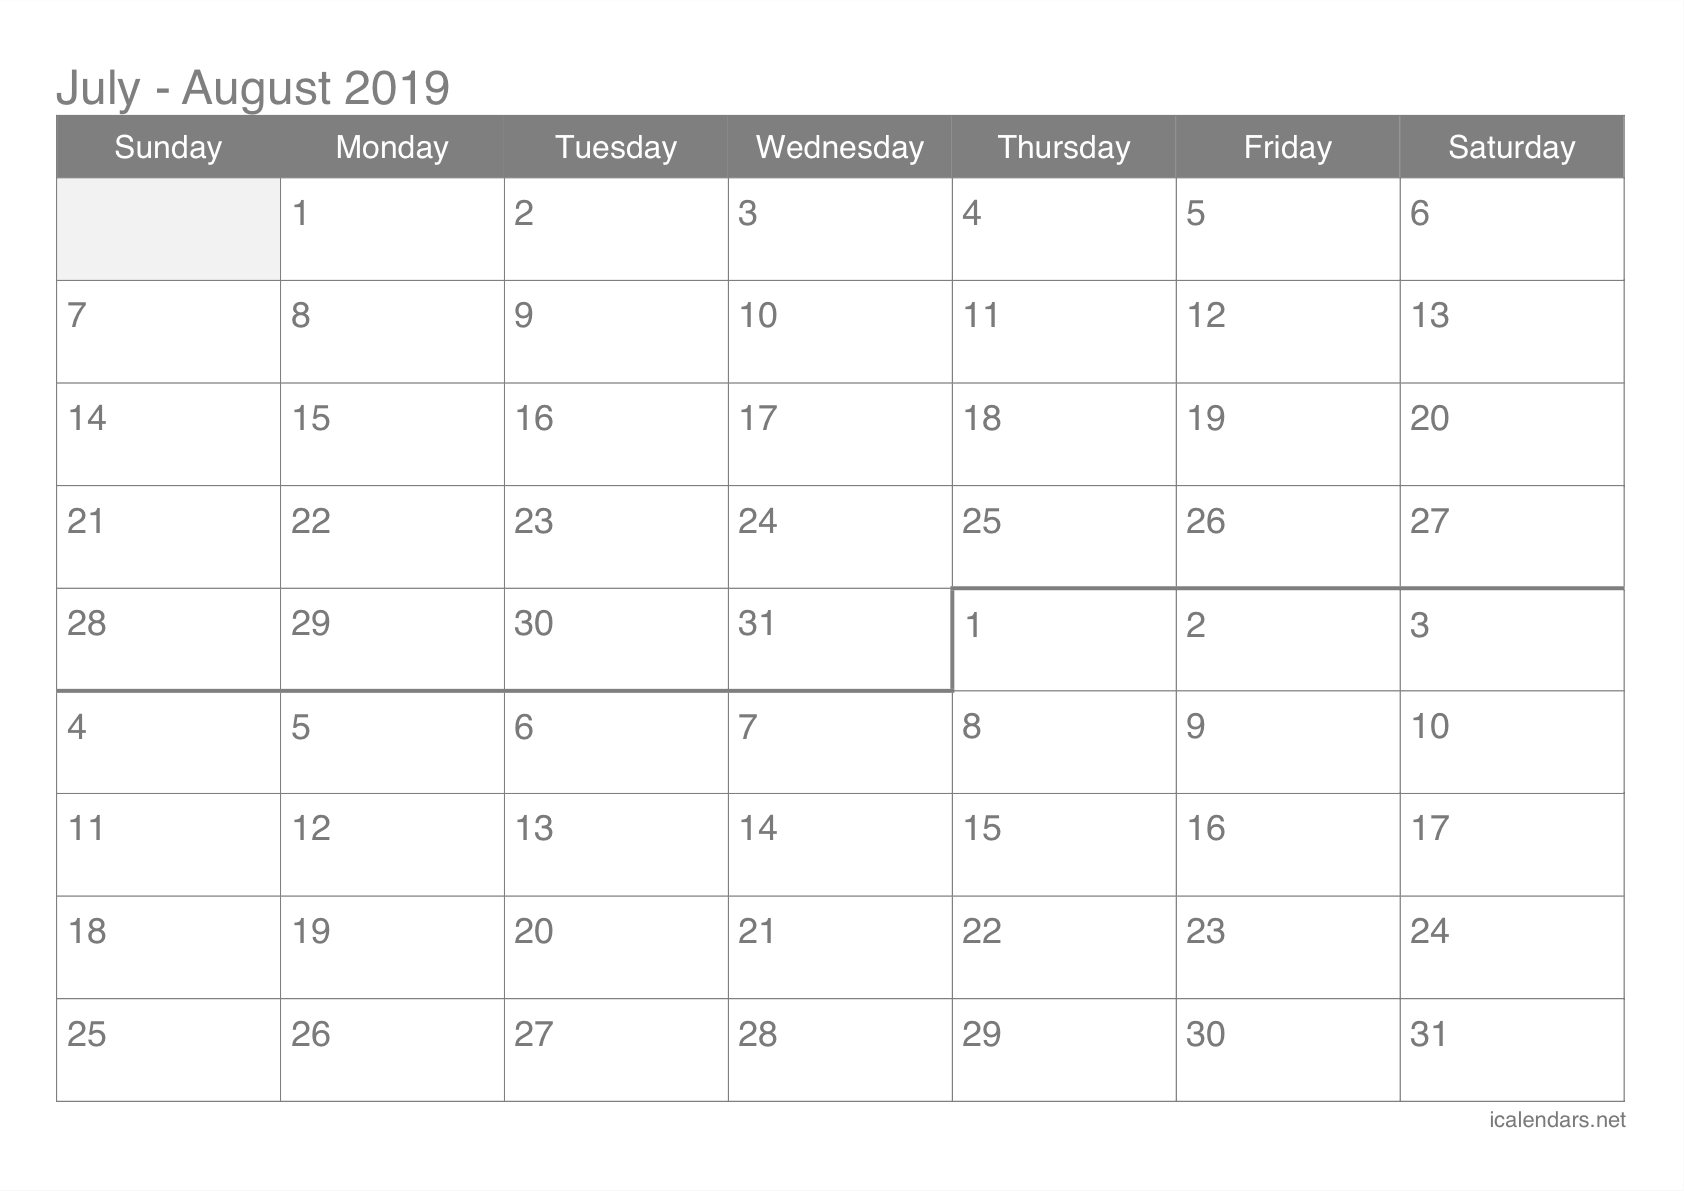 July And August 2019 Printable Calendar - Icalendars